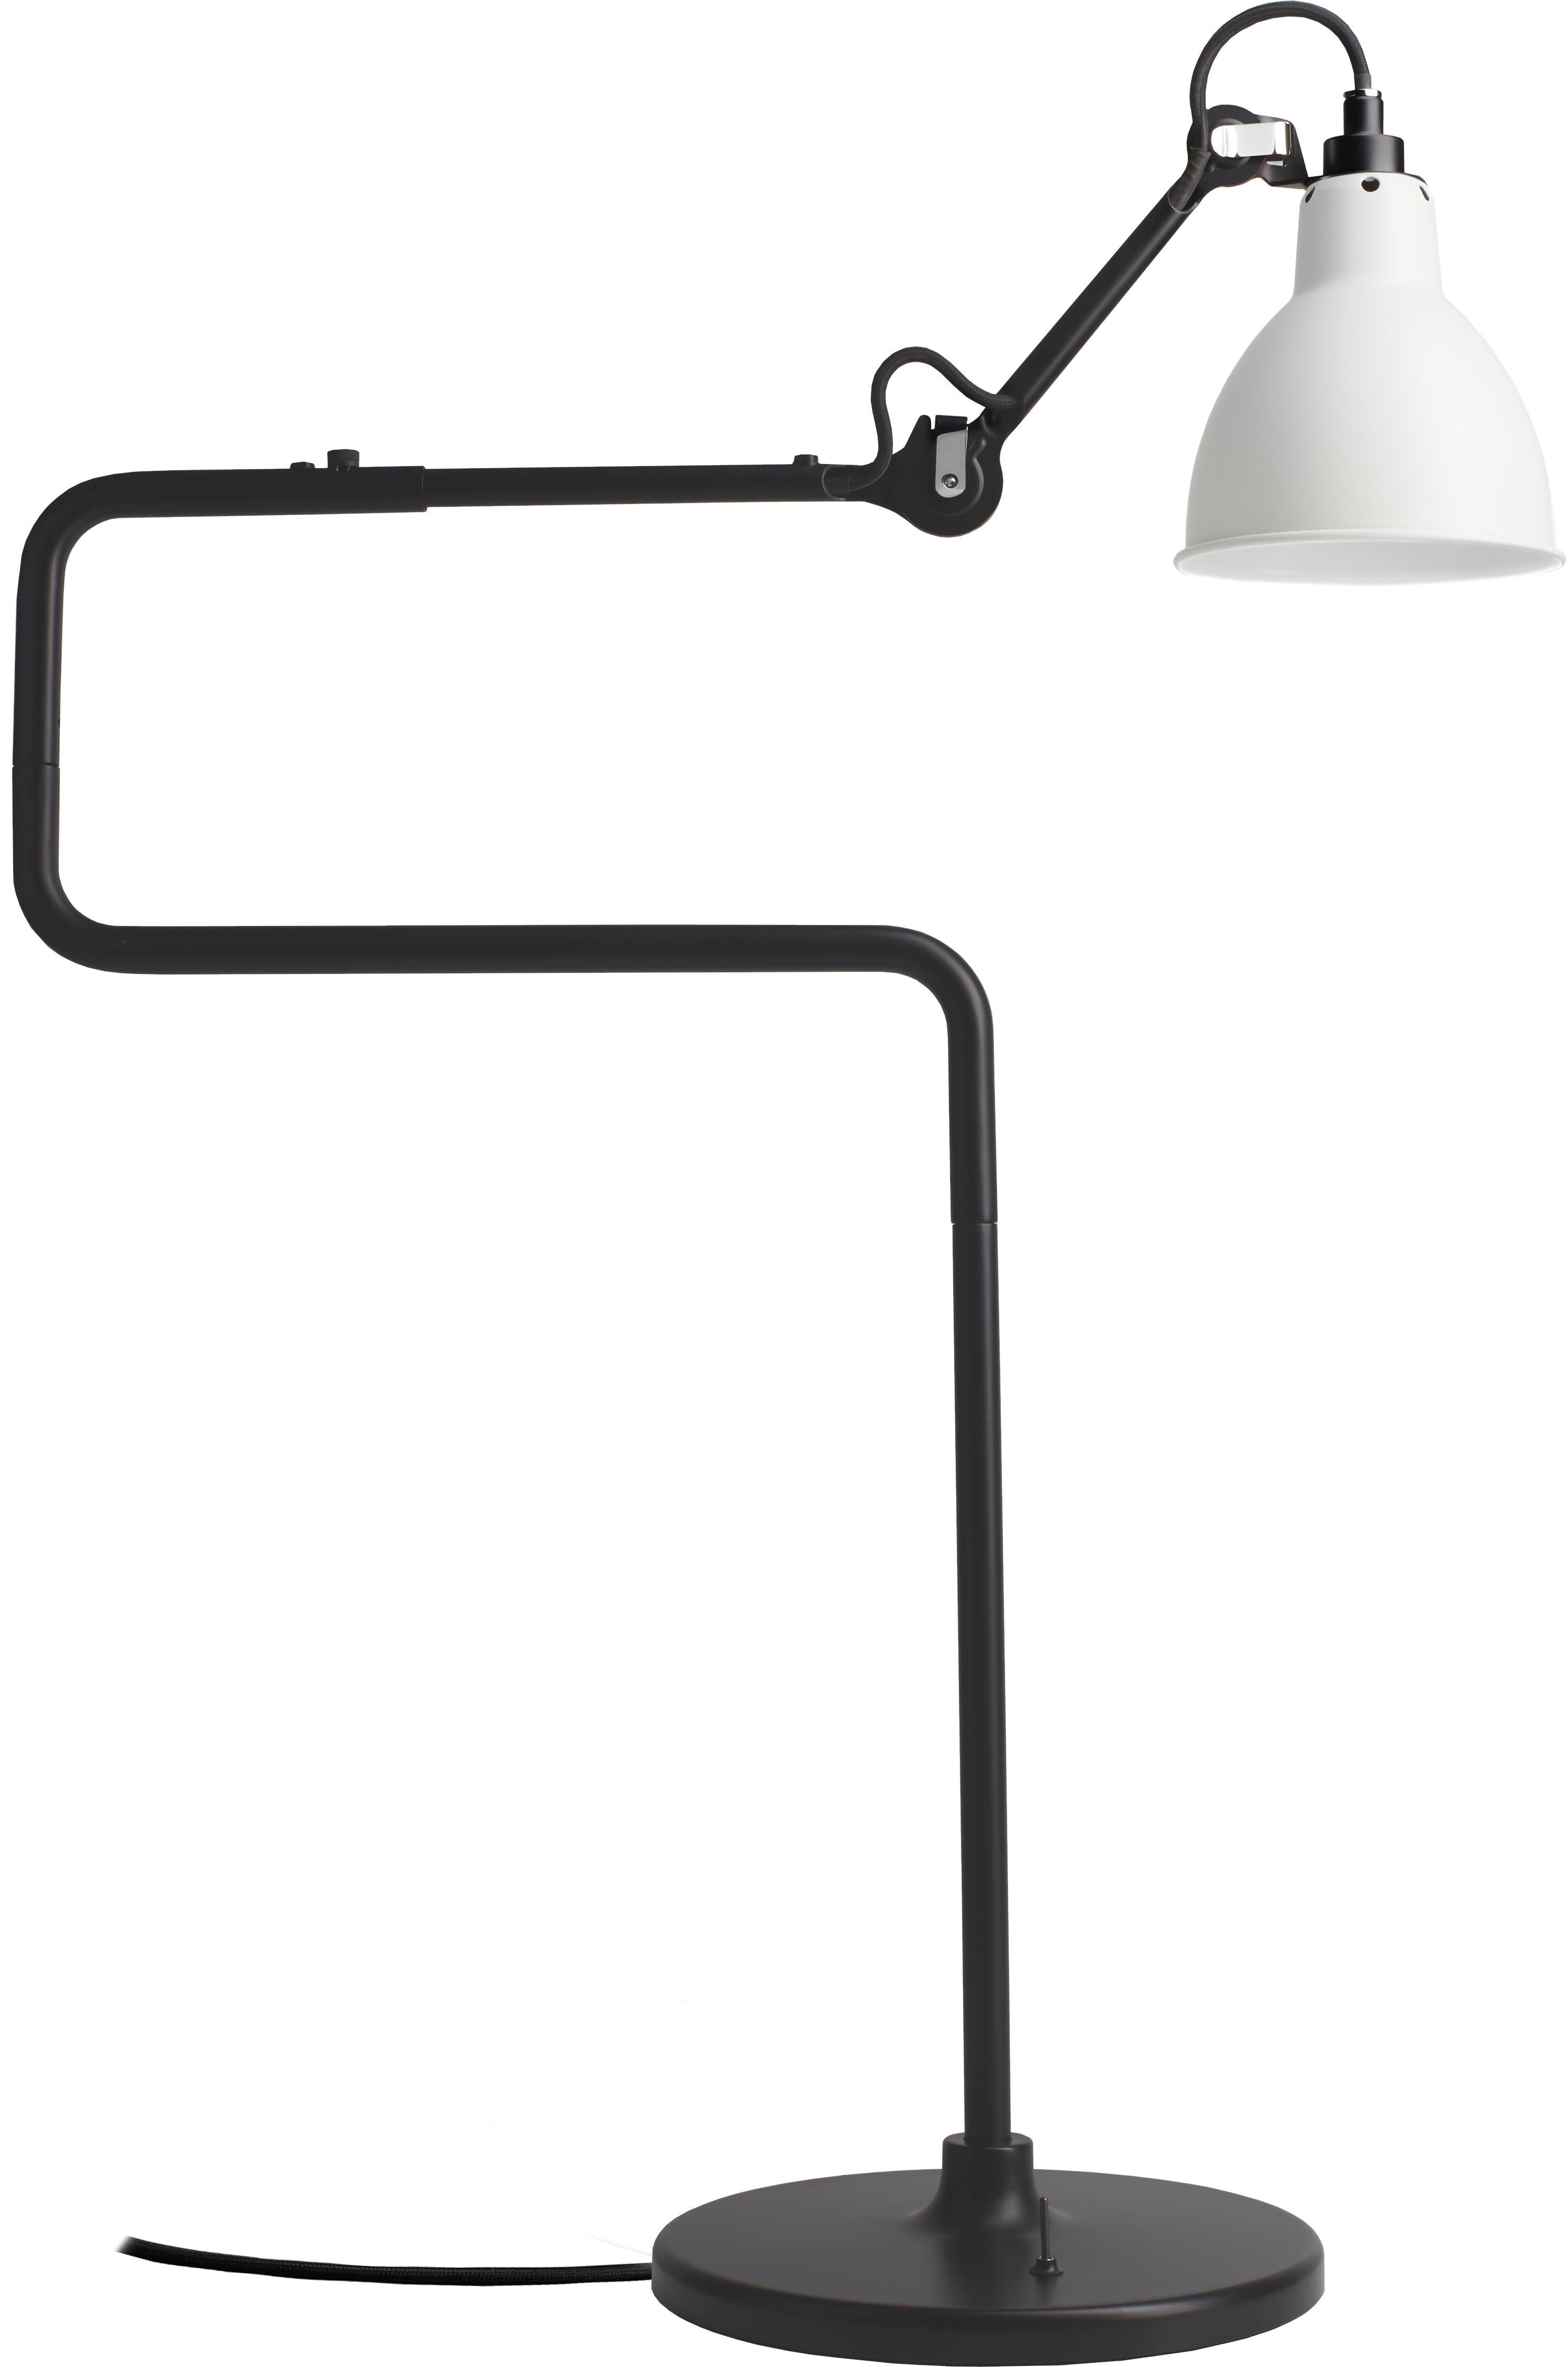 DCW Editions La Lampe Gras N°317 Table Lamp in Black Arm with White Shade For Sale